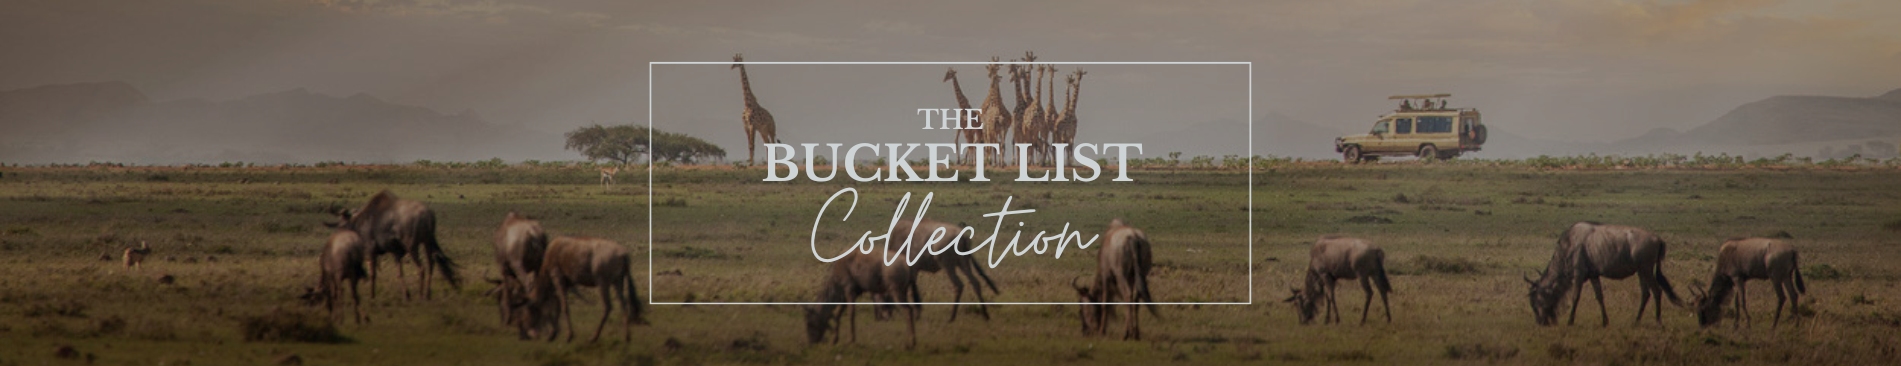 Bucket List Collection